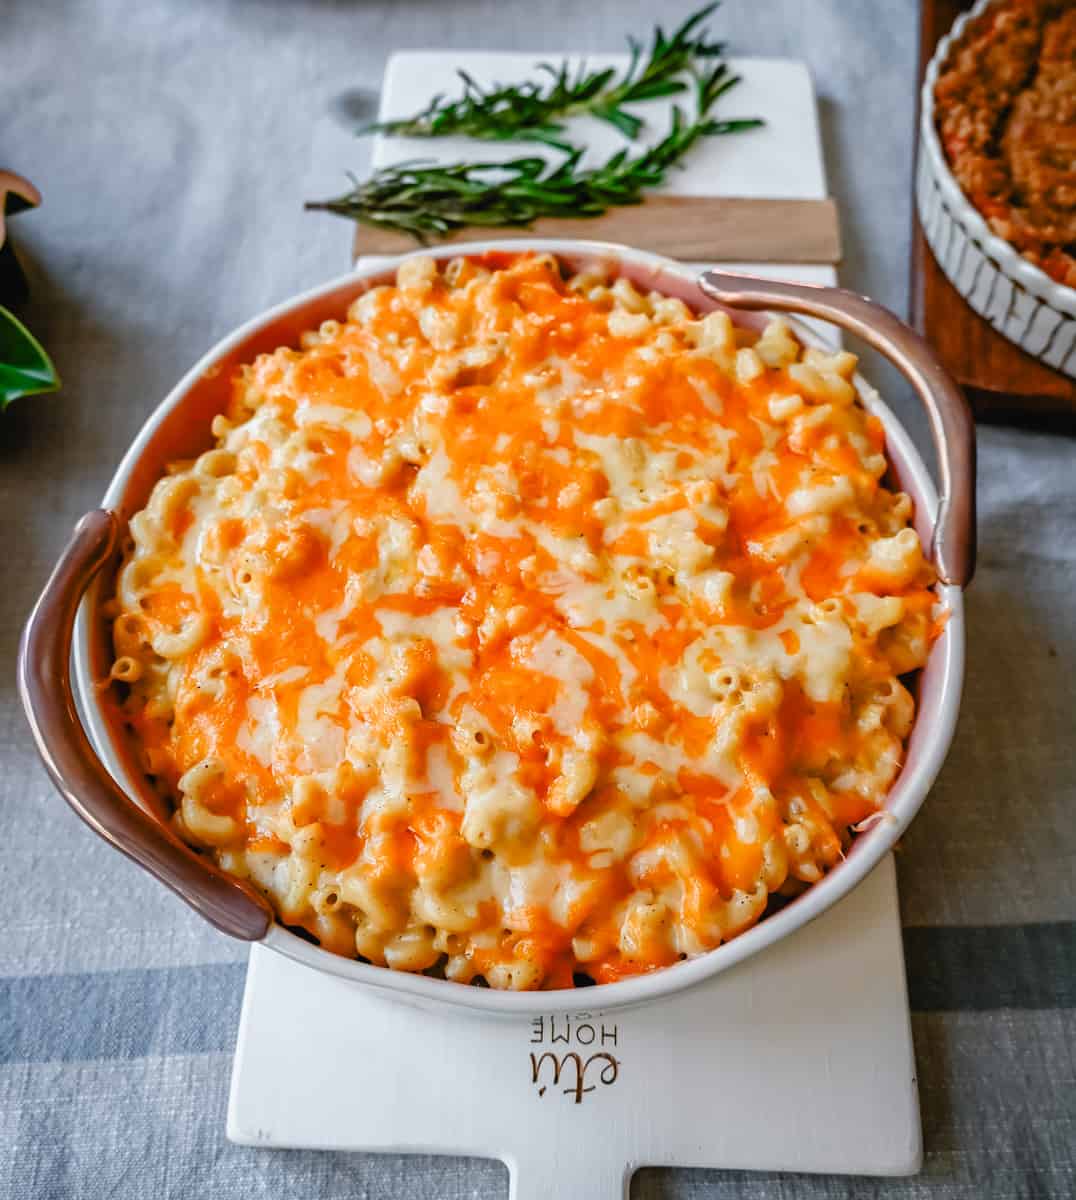 Homemade Mac and Cheese. How to make the richest, creamiest, cheesiest mac and cheese that everyone will love. This homemade macaroni and cheese is the perfect comfort food recipe.